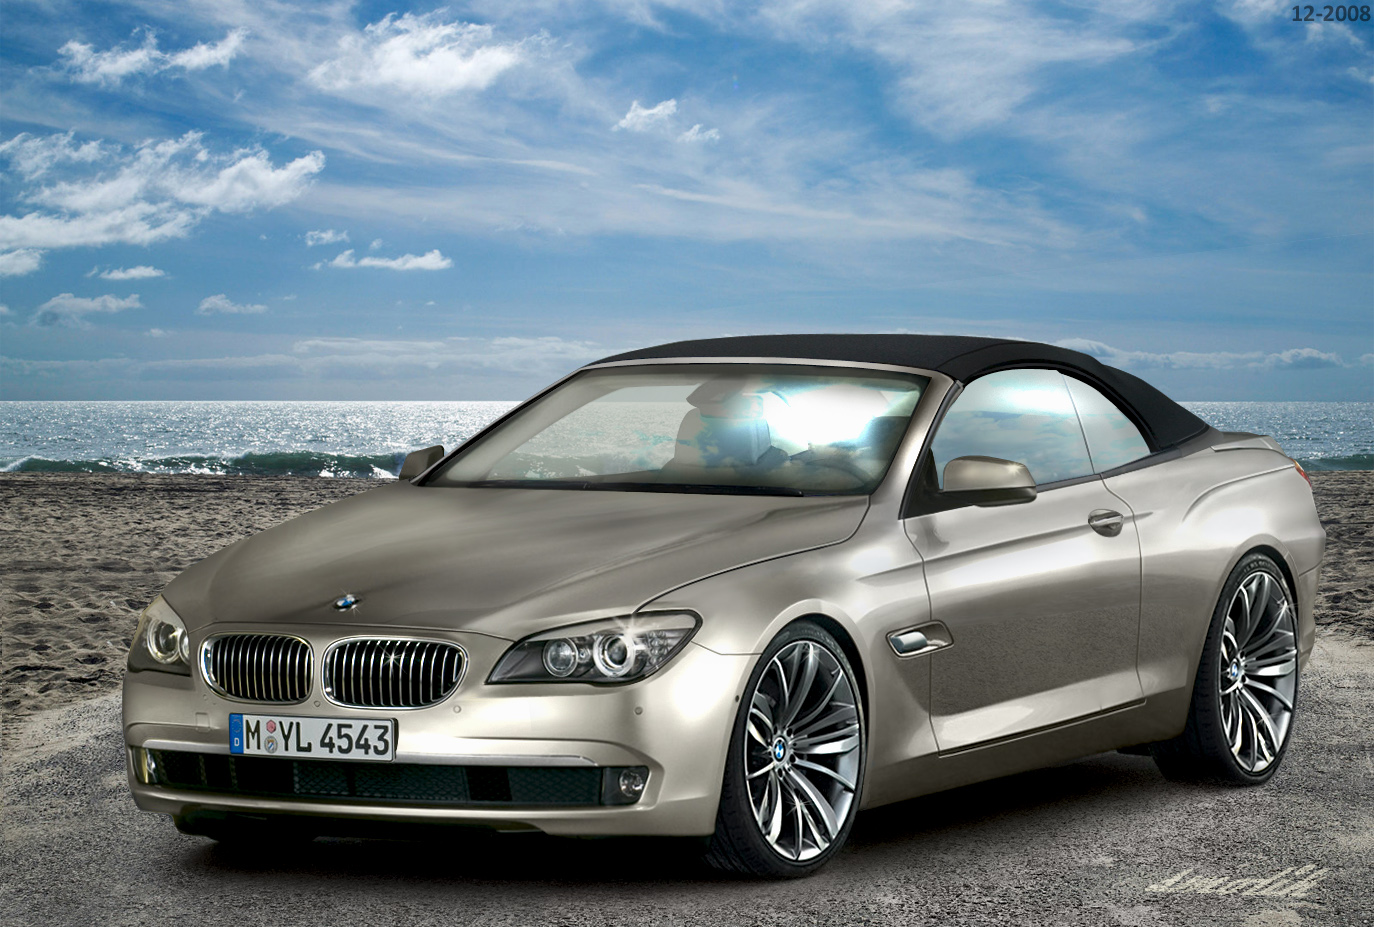 Nice wallpapers BMW Series 6 1374x927px